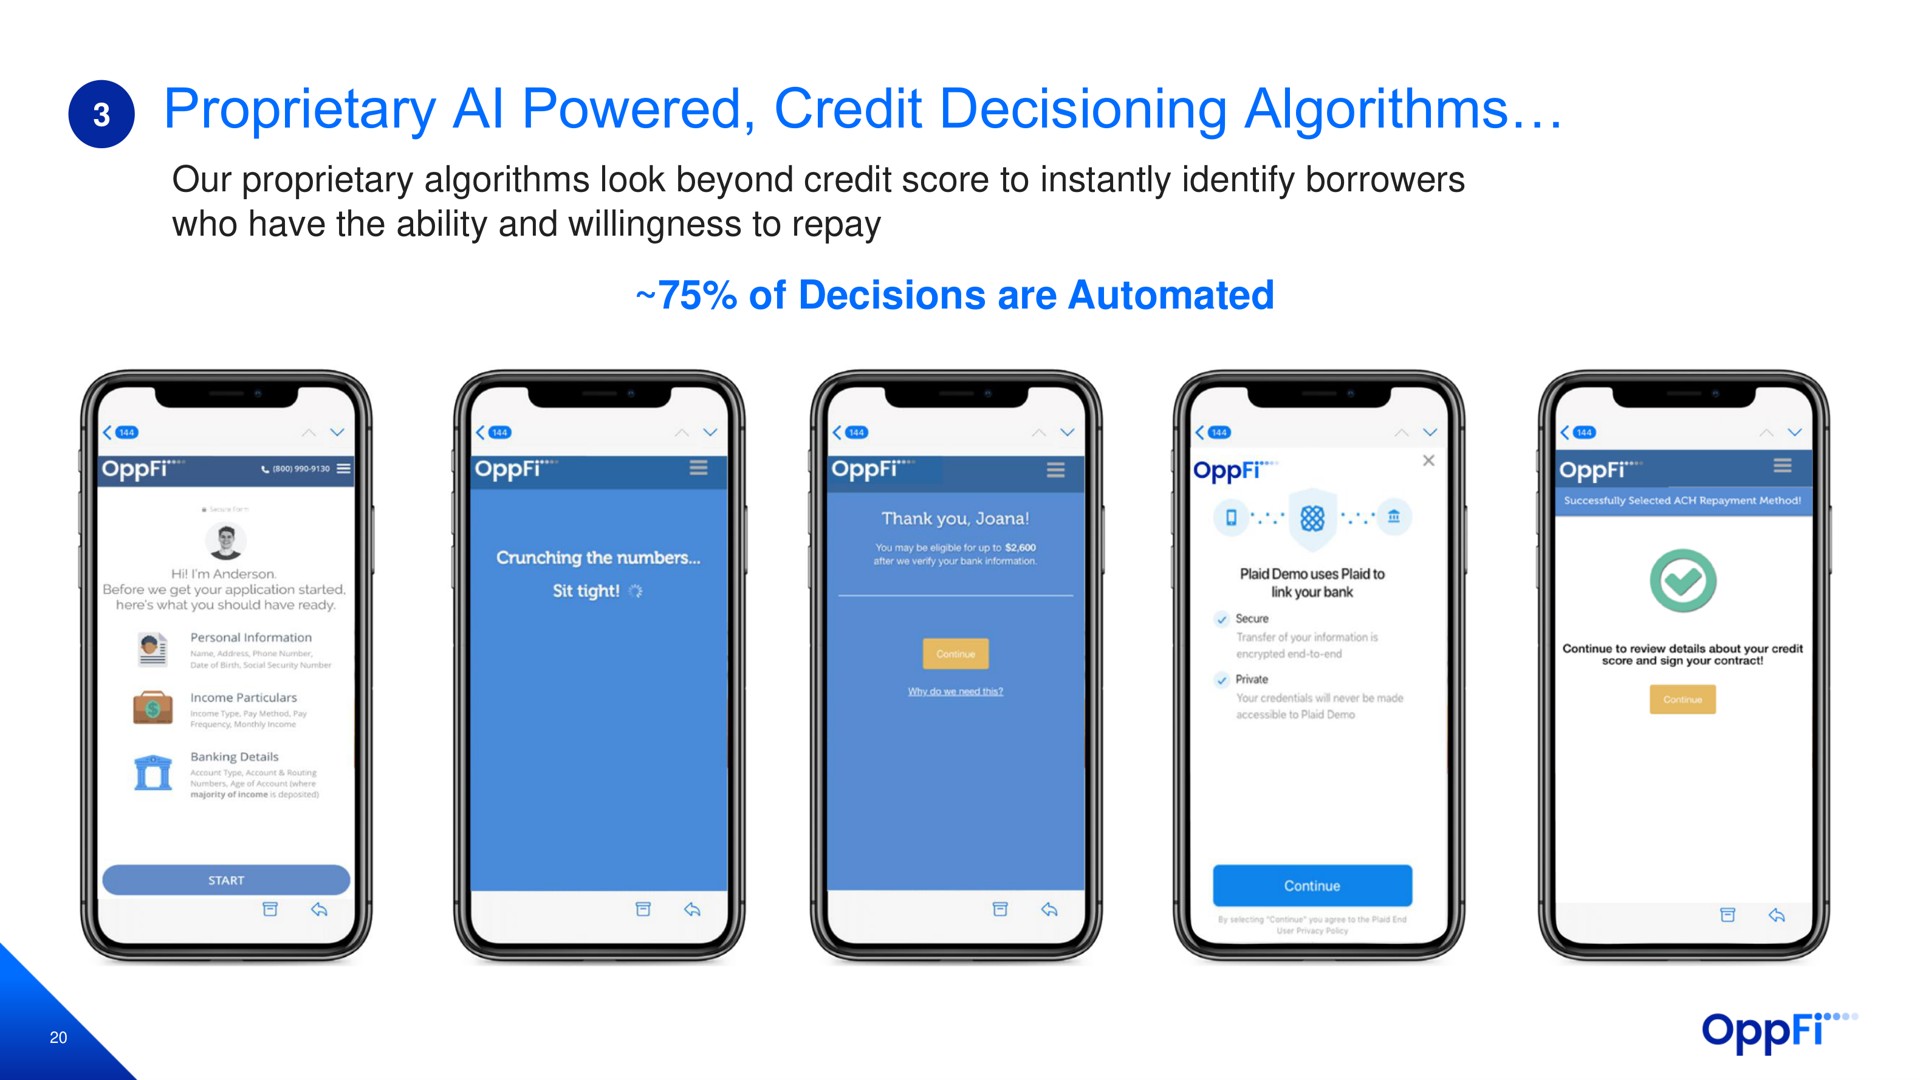 proprietary powered credit algorithms our proprietary algorithms look beyond credit score to instantly identify borrowers who have the ability and willingness to repay of decisions are | OppFi